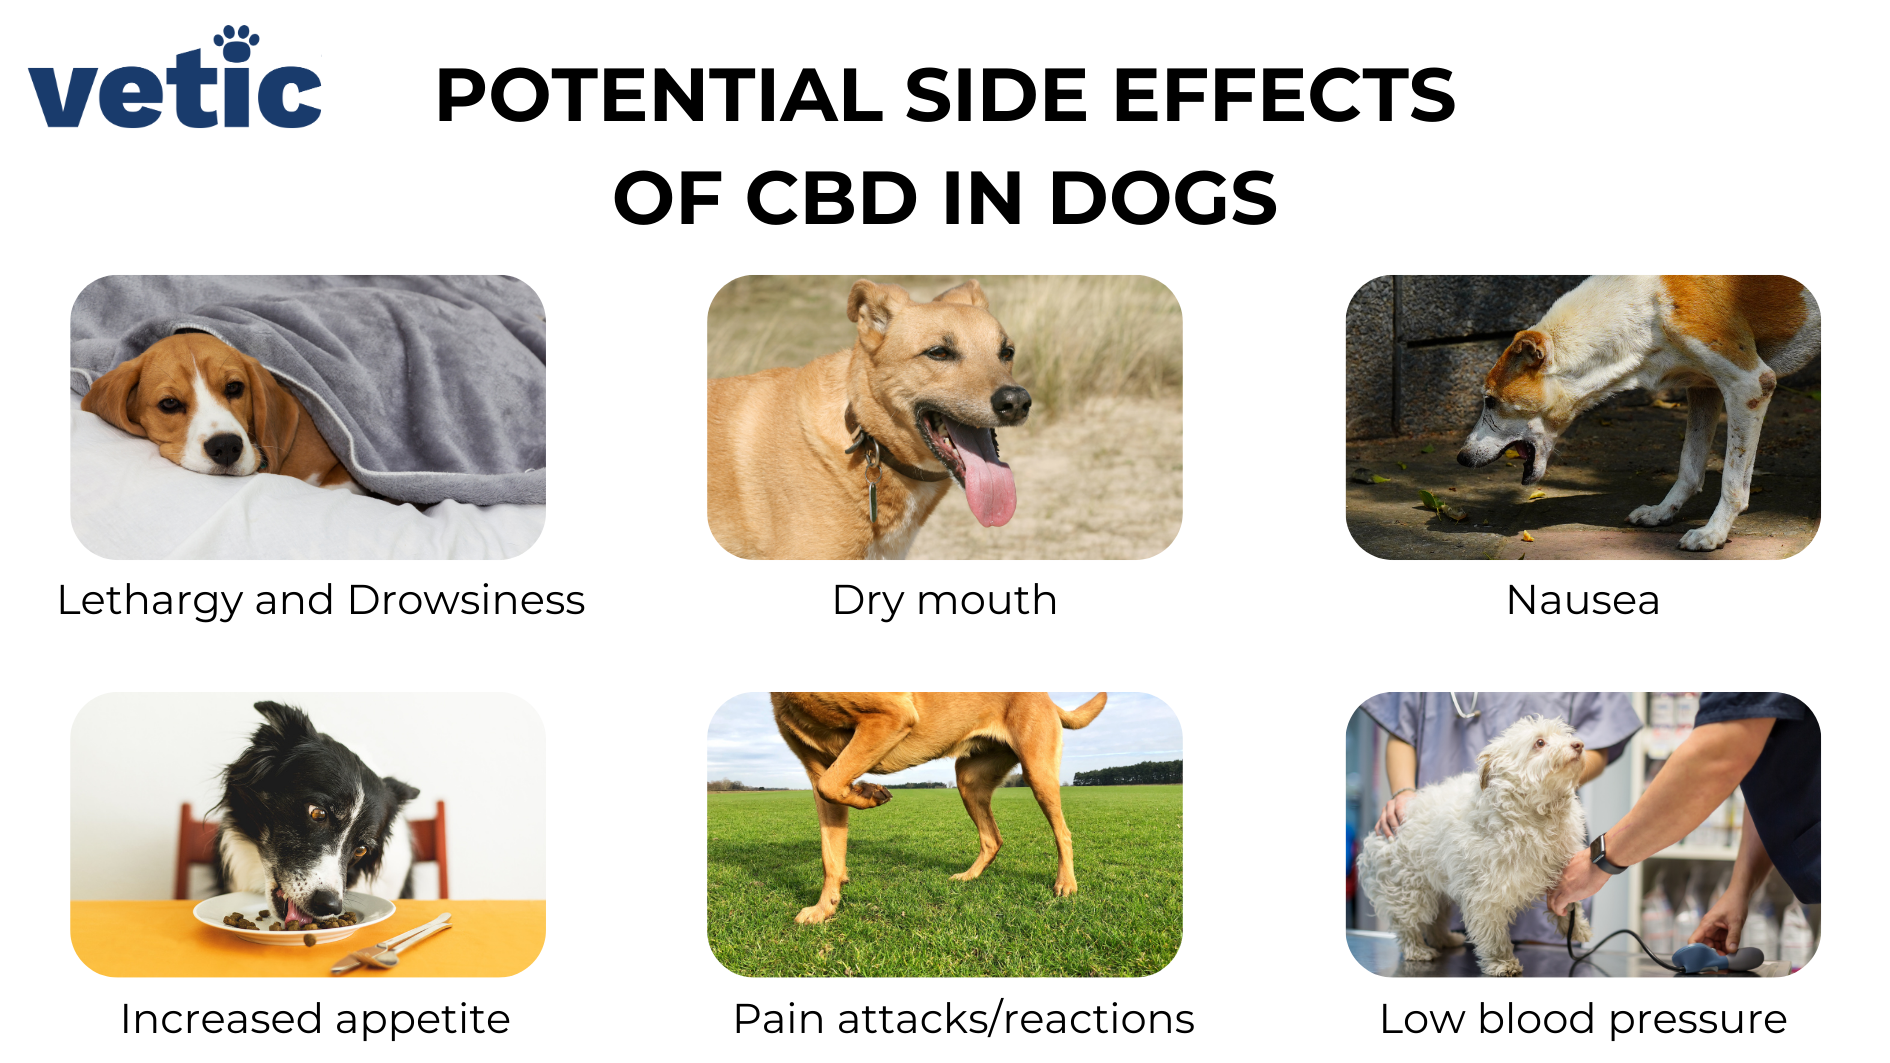 infographic titled "potential side effects of CBD oil for dogs" CBD oil and supplements for Dogs can have a number of side effects including nausea, dry mouth, lethargy and drowsiness, increased appetite, panic attacks, low BP.